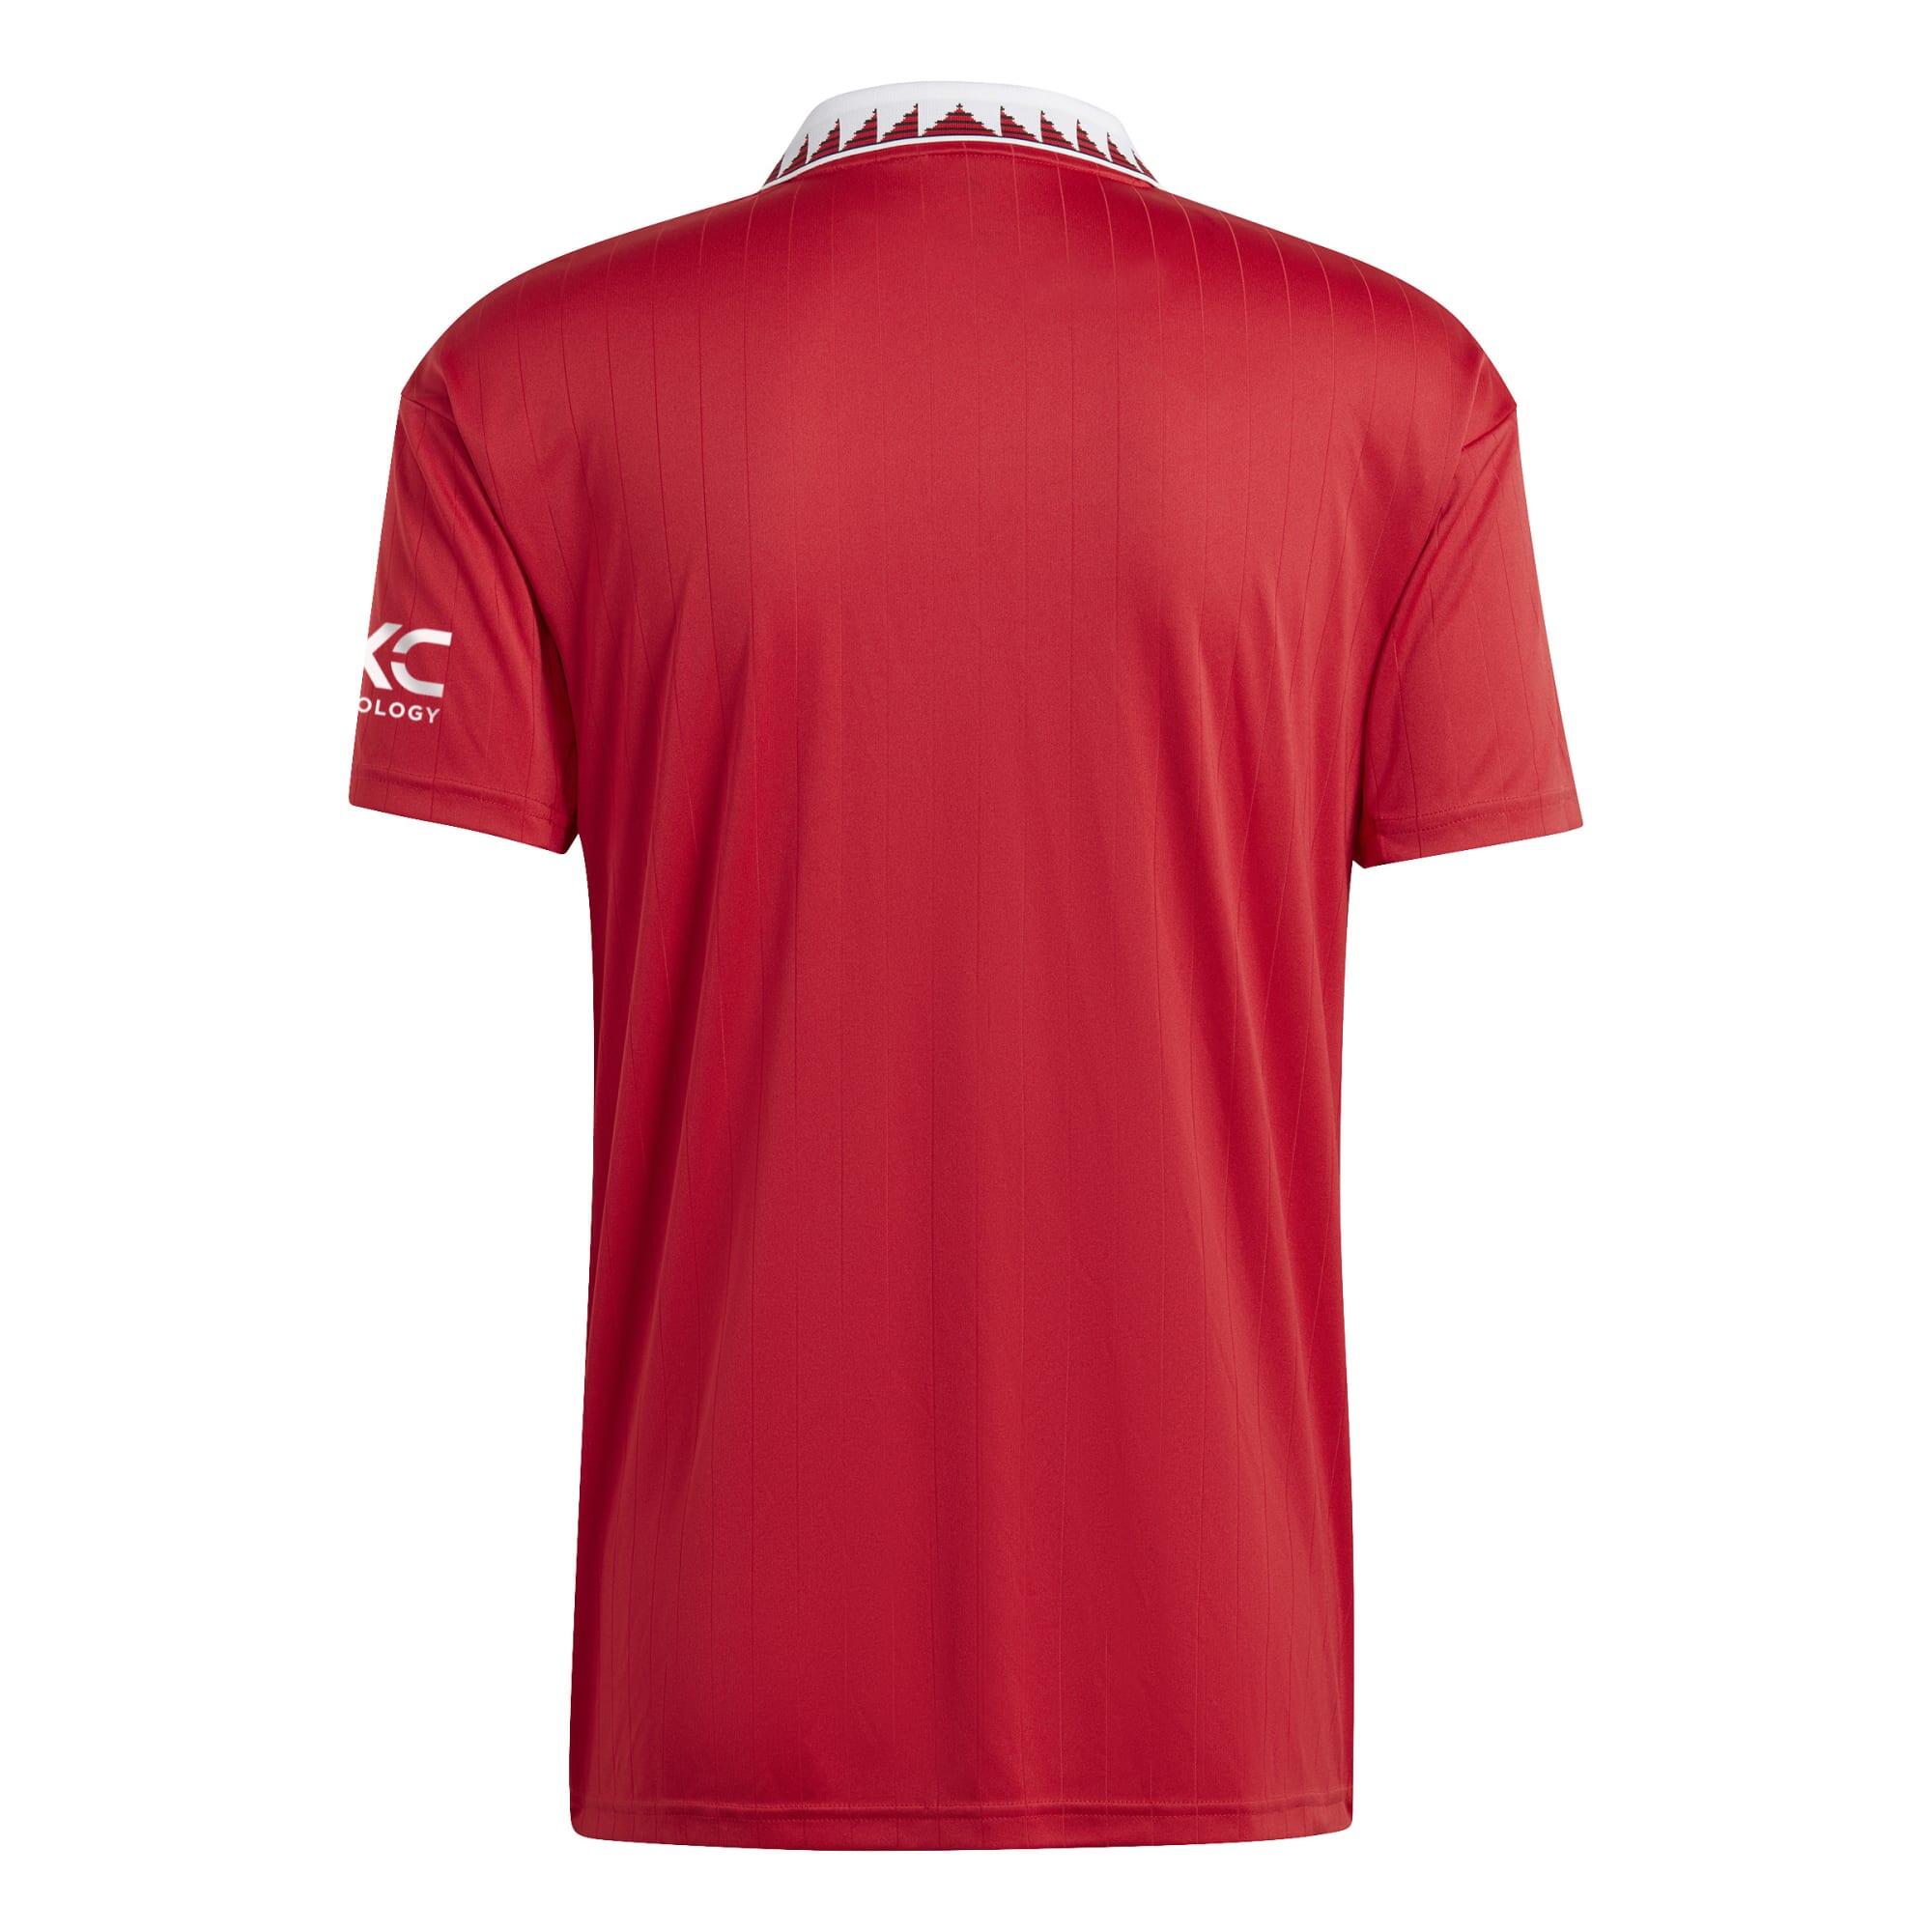 Adult Manchester United 2022 Home Shirt 2/2